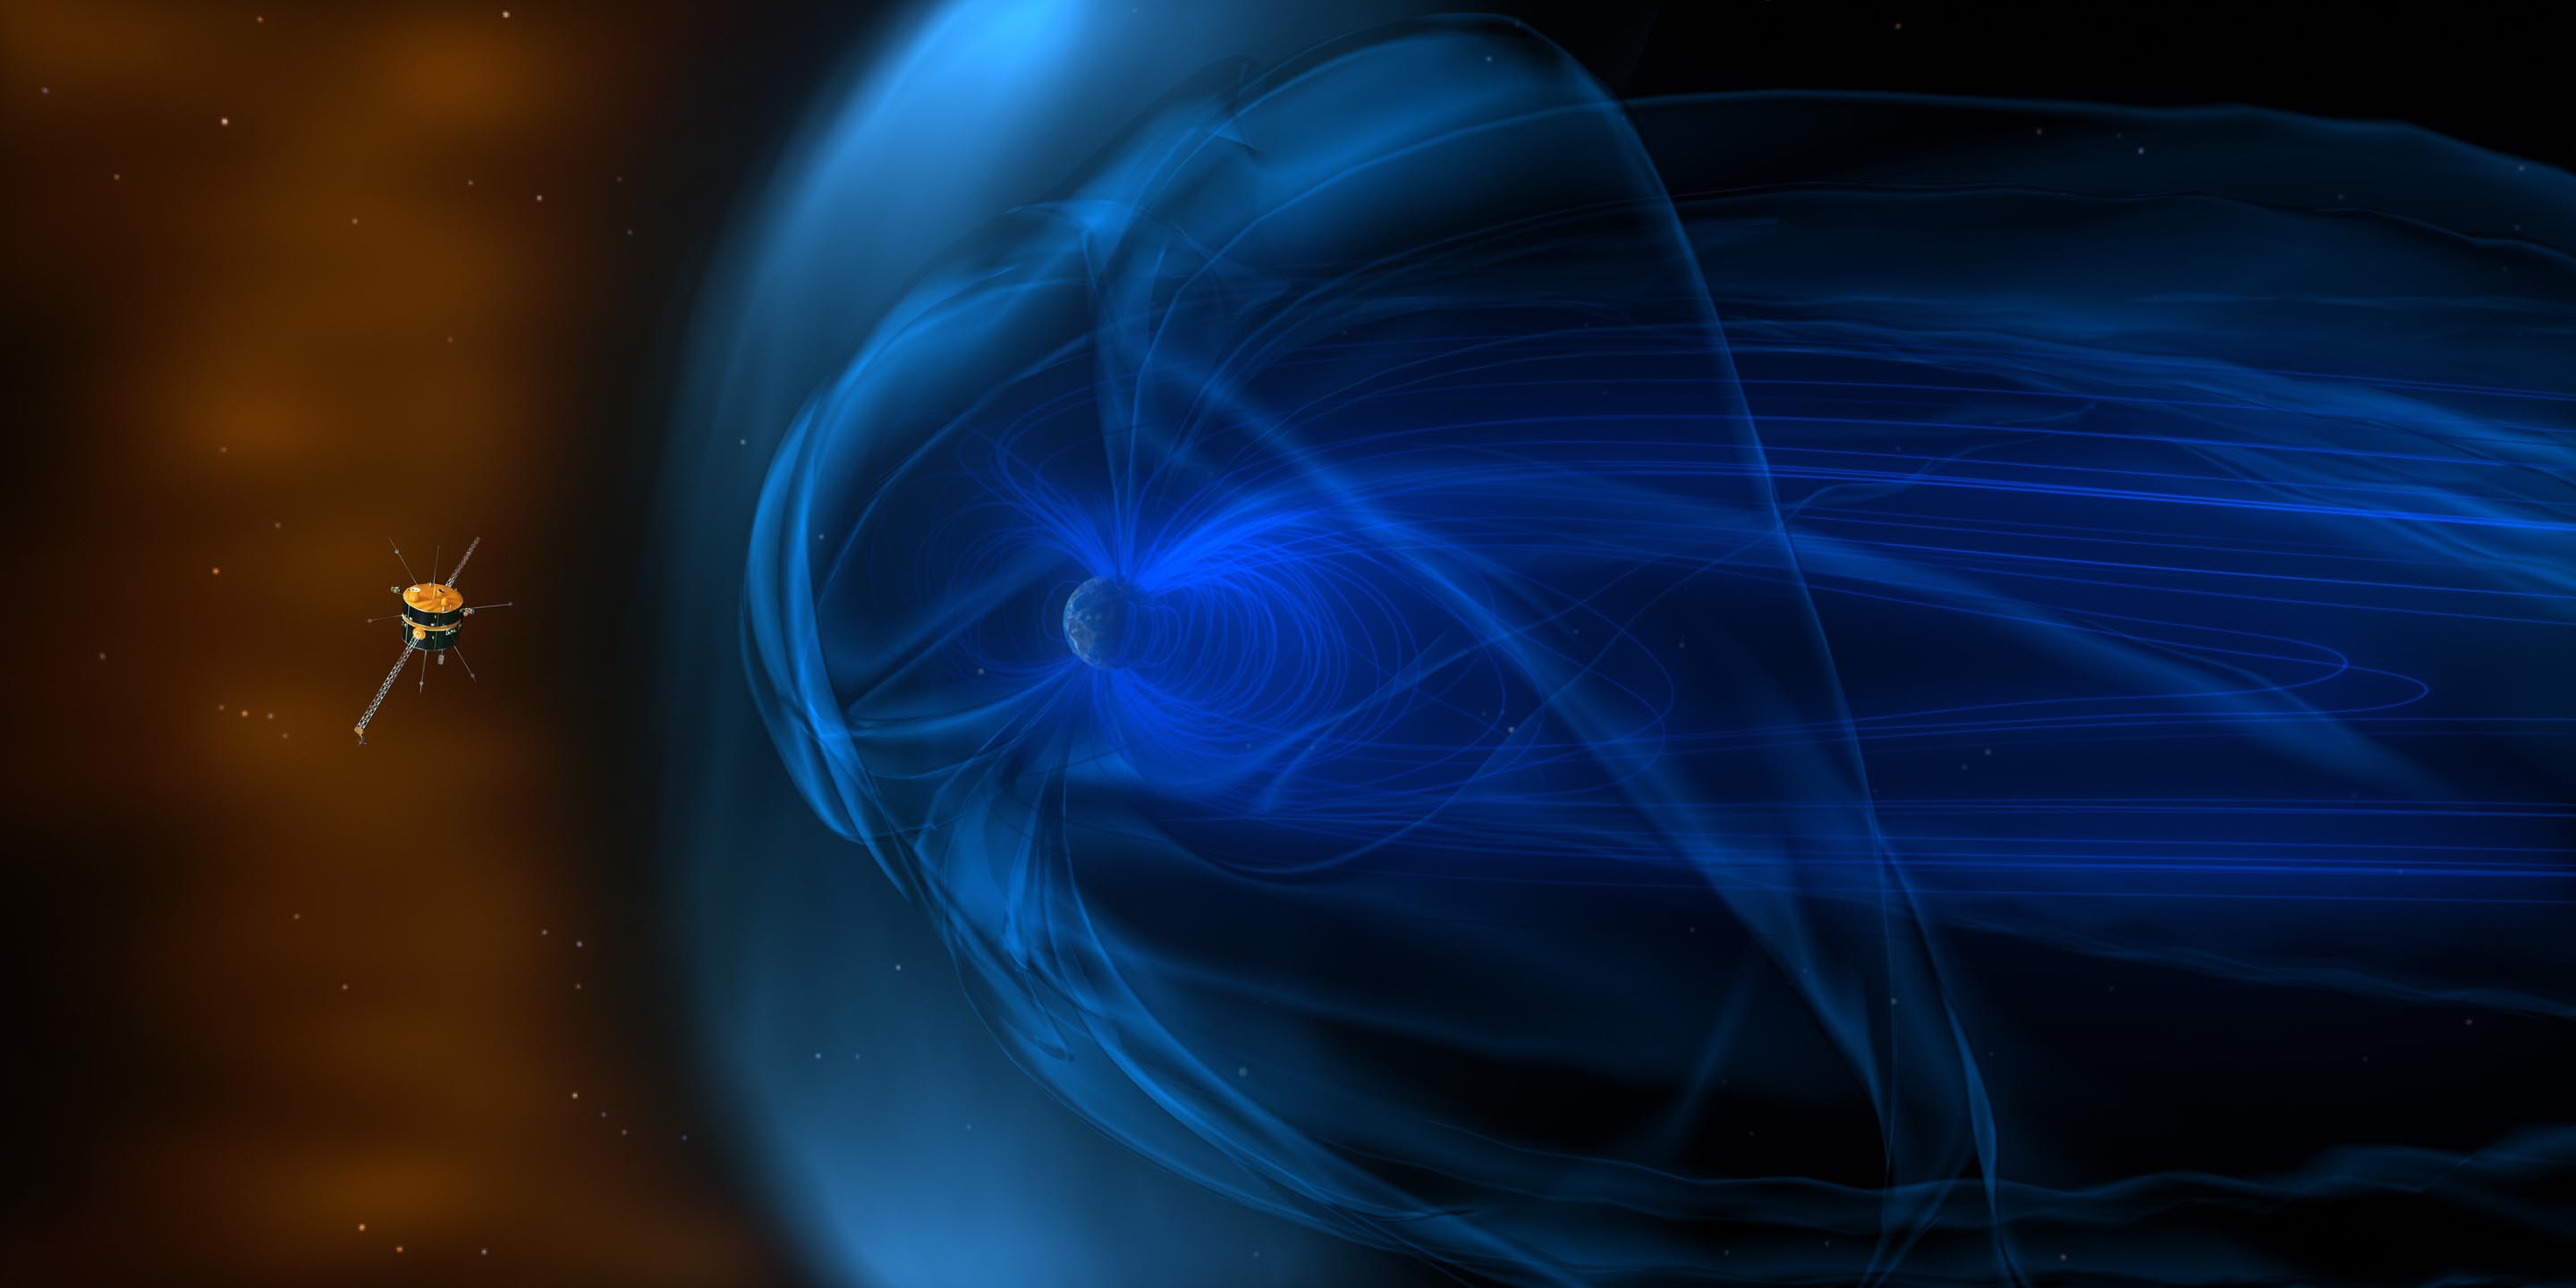 Illustration shows the Wind spacecraft (on the left) in space next to Earth and its magnetosphere (on the right)